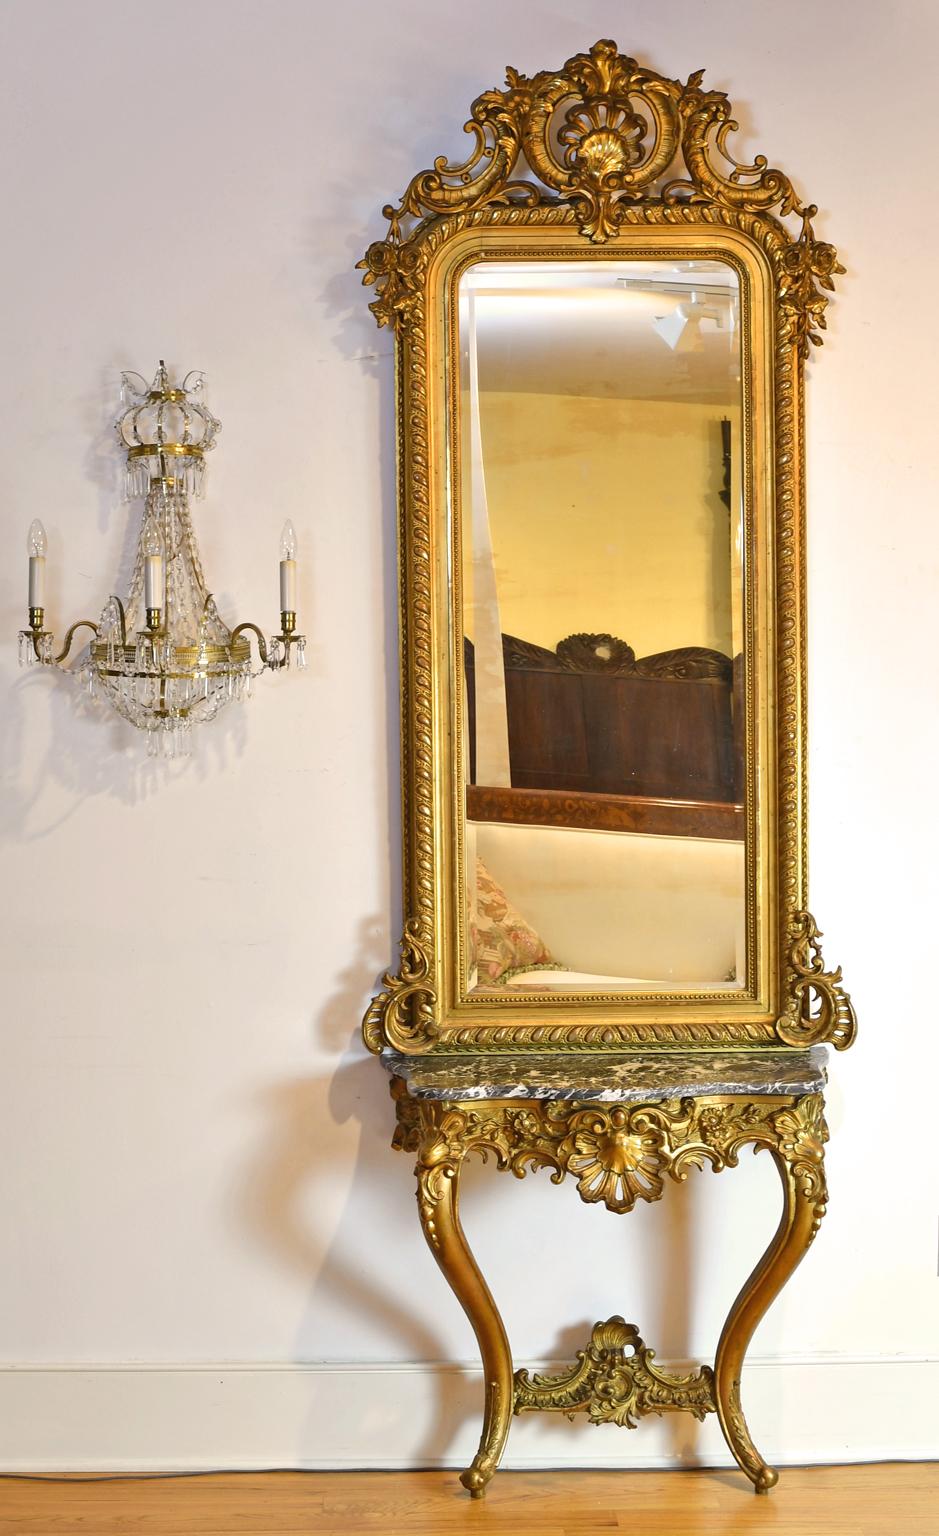 A very lovely French rococo-style giltwood mirror & console. The console is a period Louis XV rococo piece (circa late 1700's) adorned with rocaille, acanthus & floral carvings that include scallop shells & daisies, with cabriole legs & serpentine